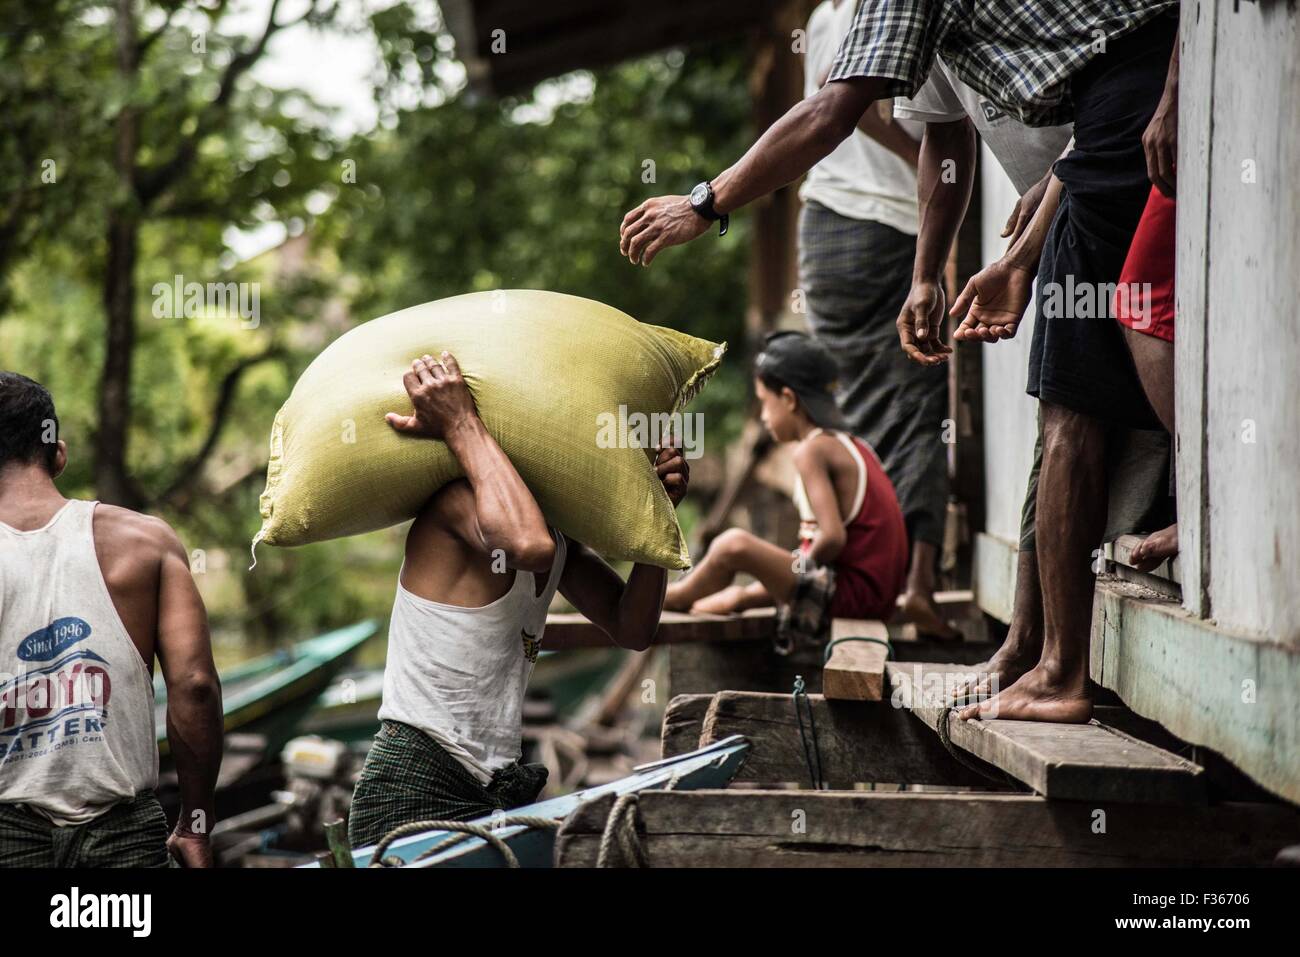 Humanitarian aid supplies are delivered by an NGO to flood hit communities in Myanmar's Irrawaddy delta region. Stock Photo